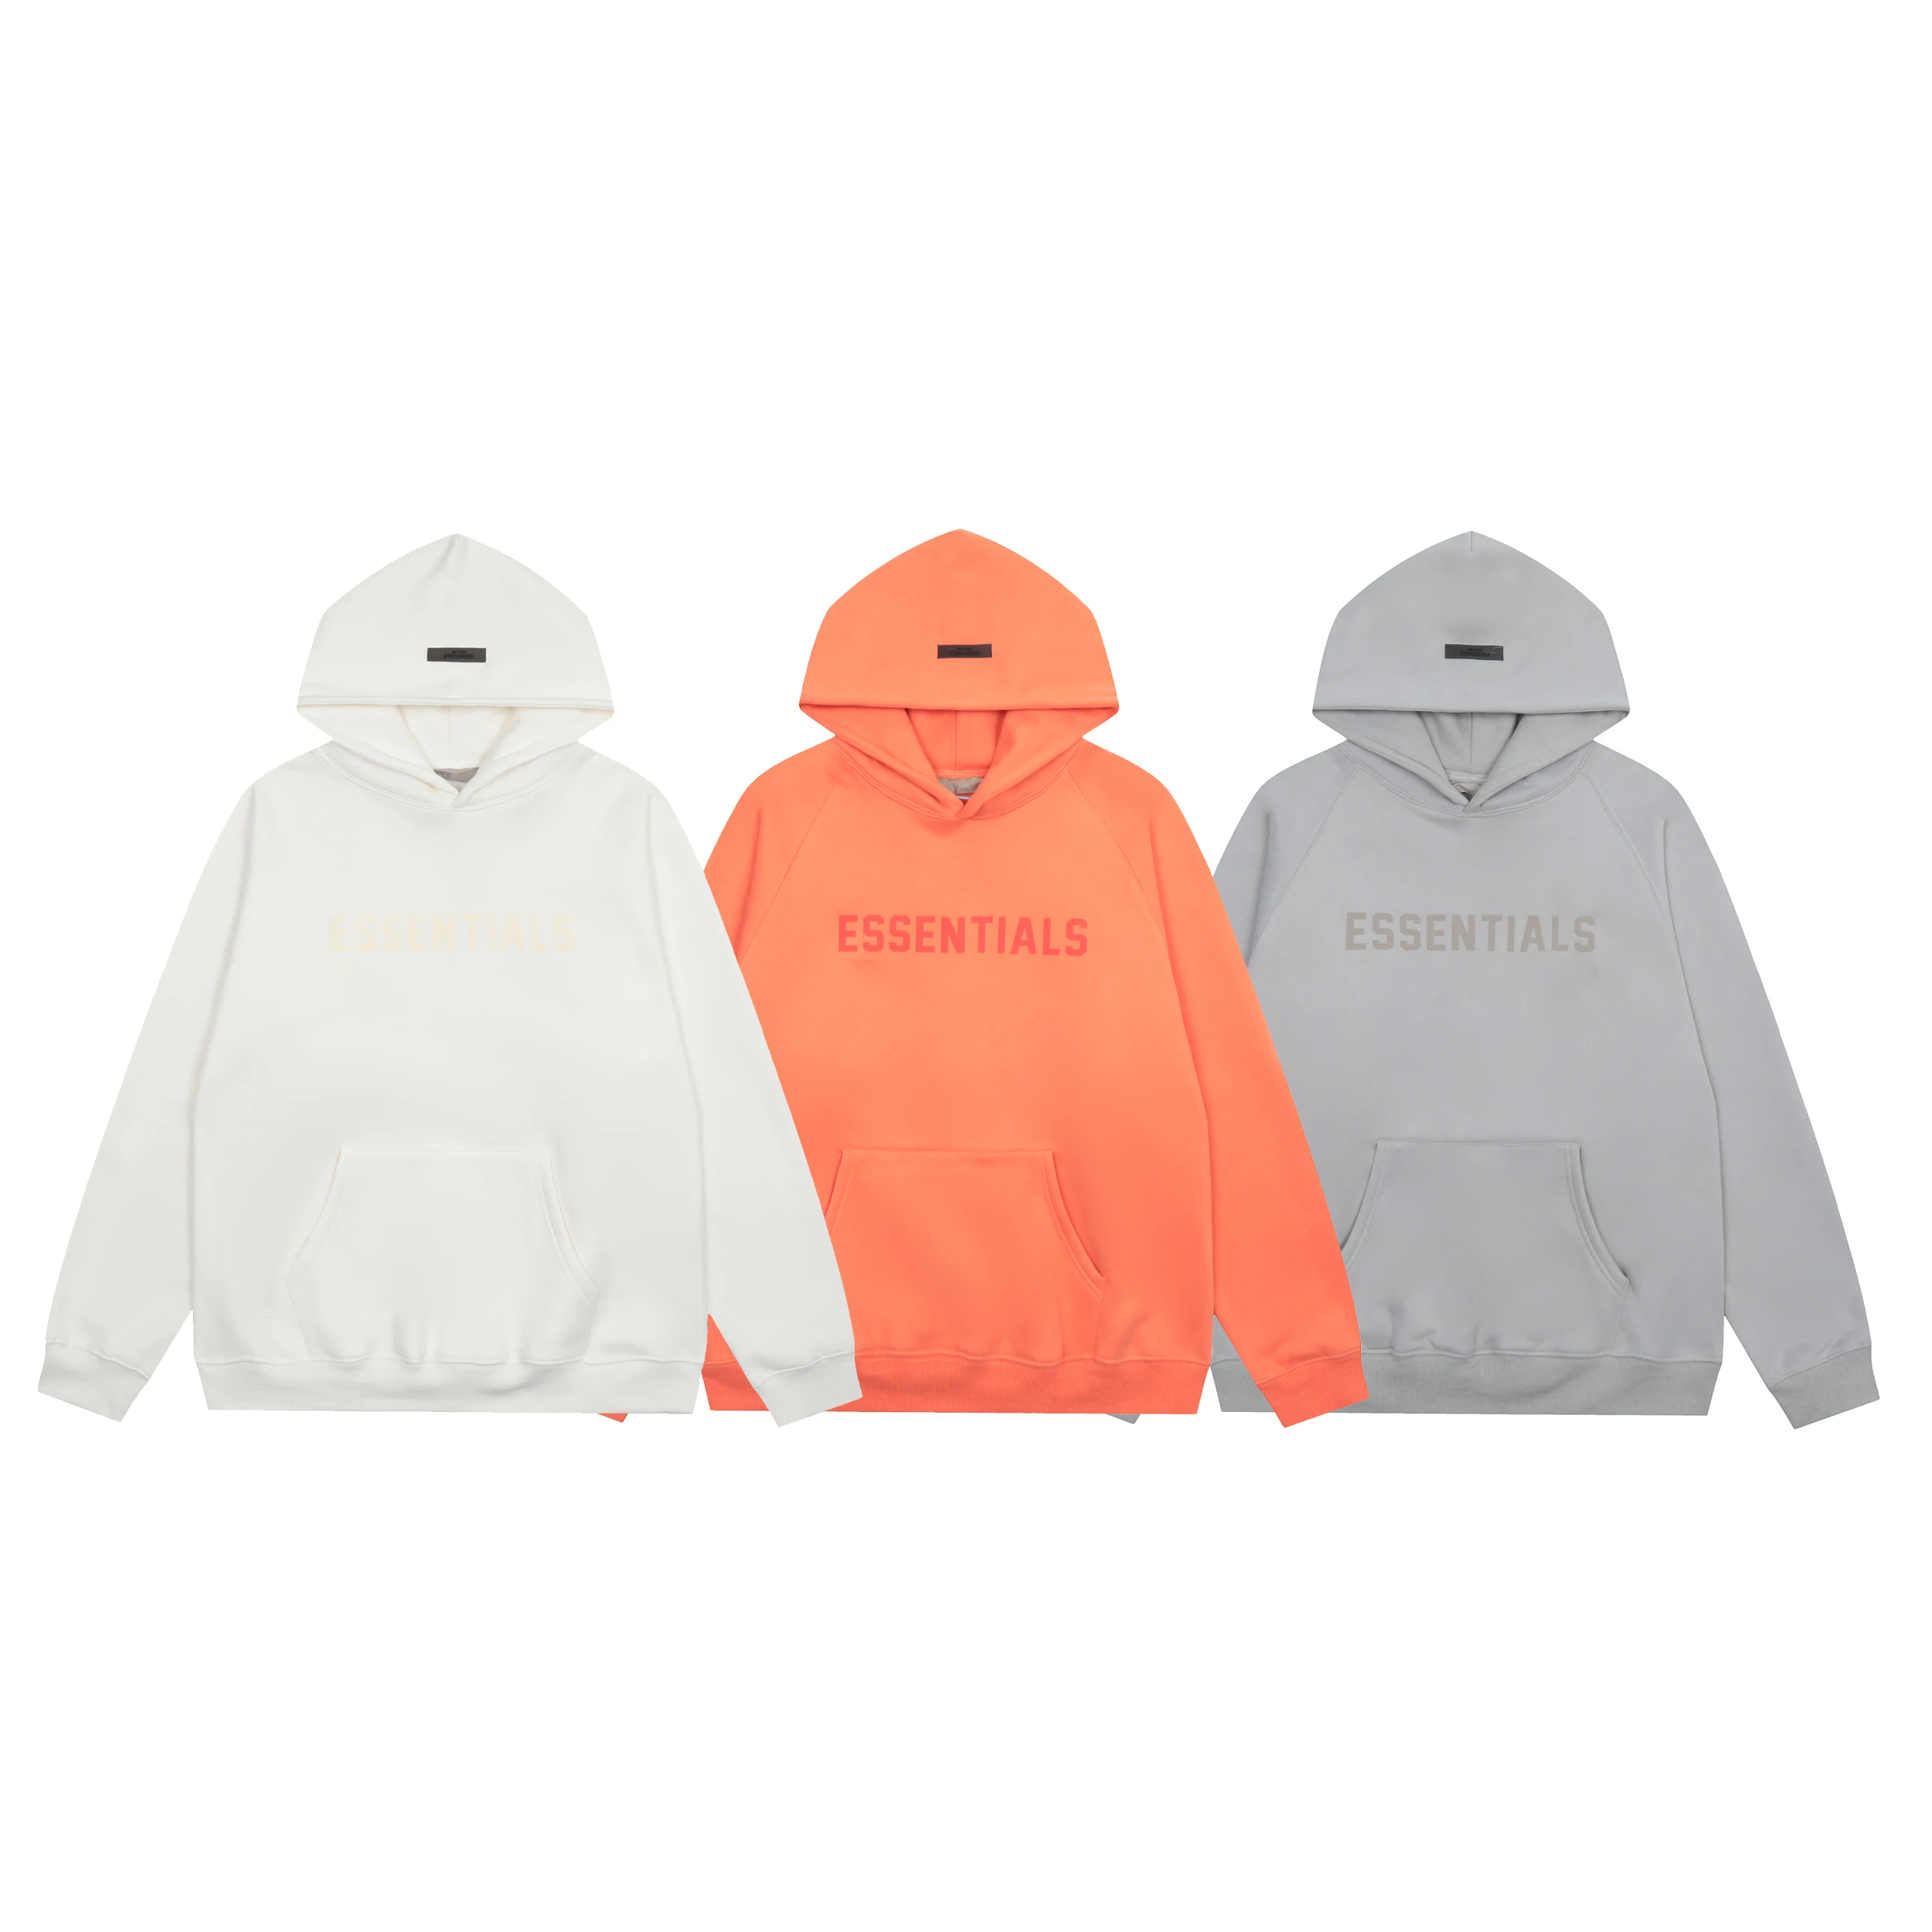 

New Oversized Men ESSENTIALS Hoodies High Quality Flocked 100% Cotton Sweatshirts Loose Couples Tops Fashion Hip Hop Hoodie